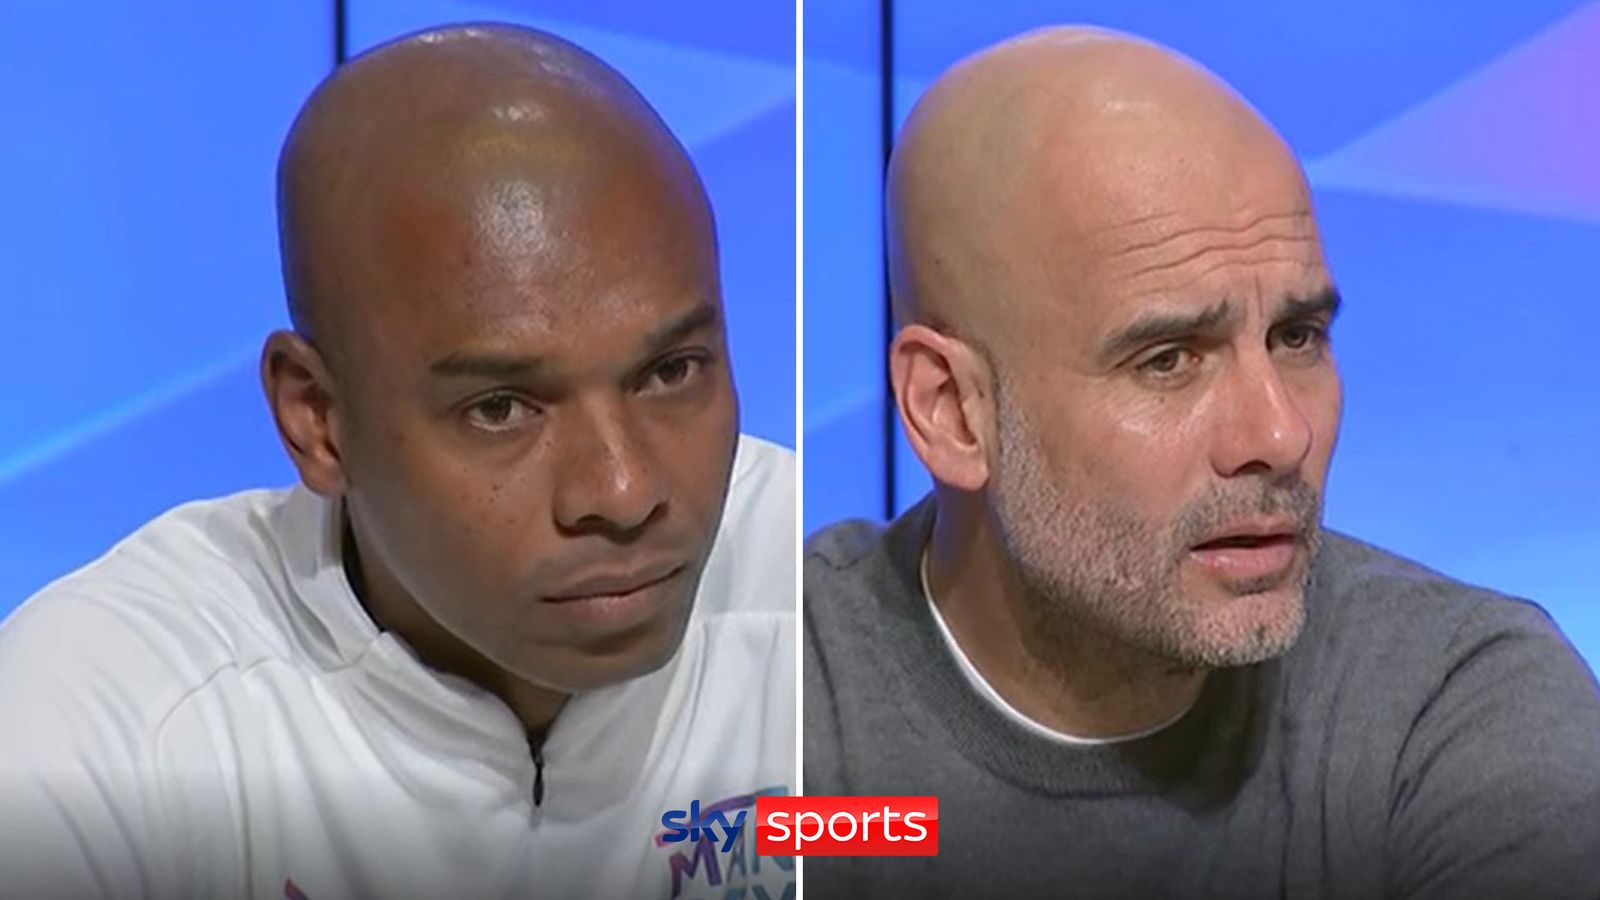 Fernandinho confirms he is set to leave Man City | Pep Guardiola: I didn't know